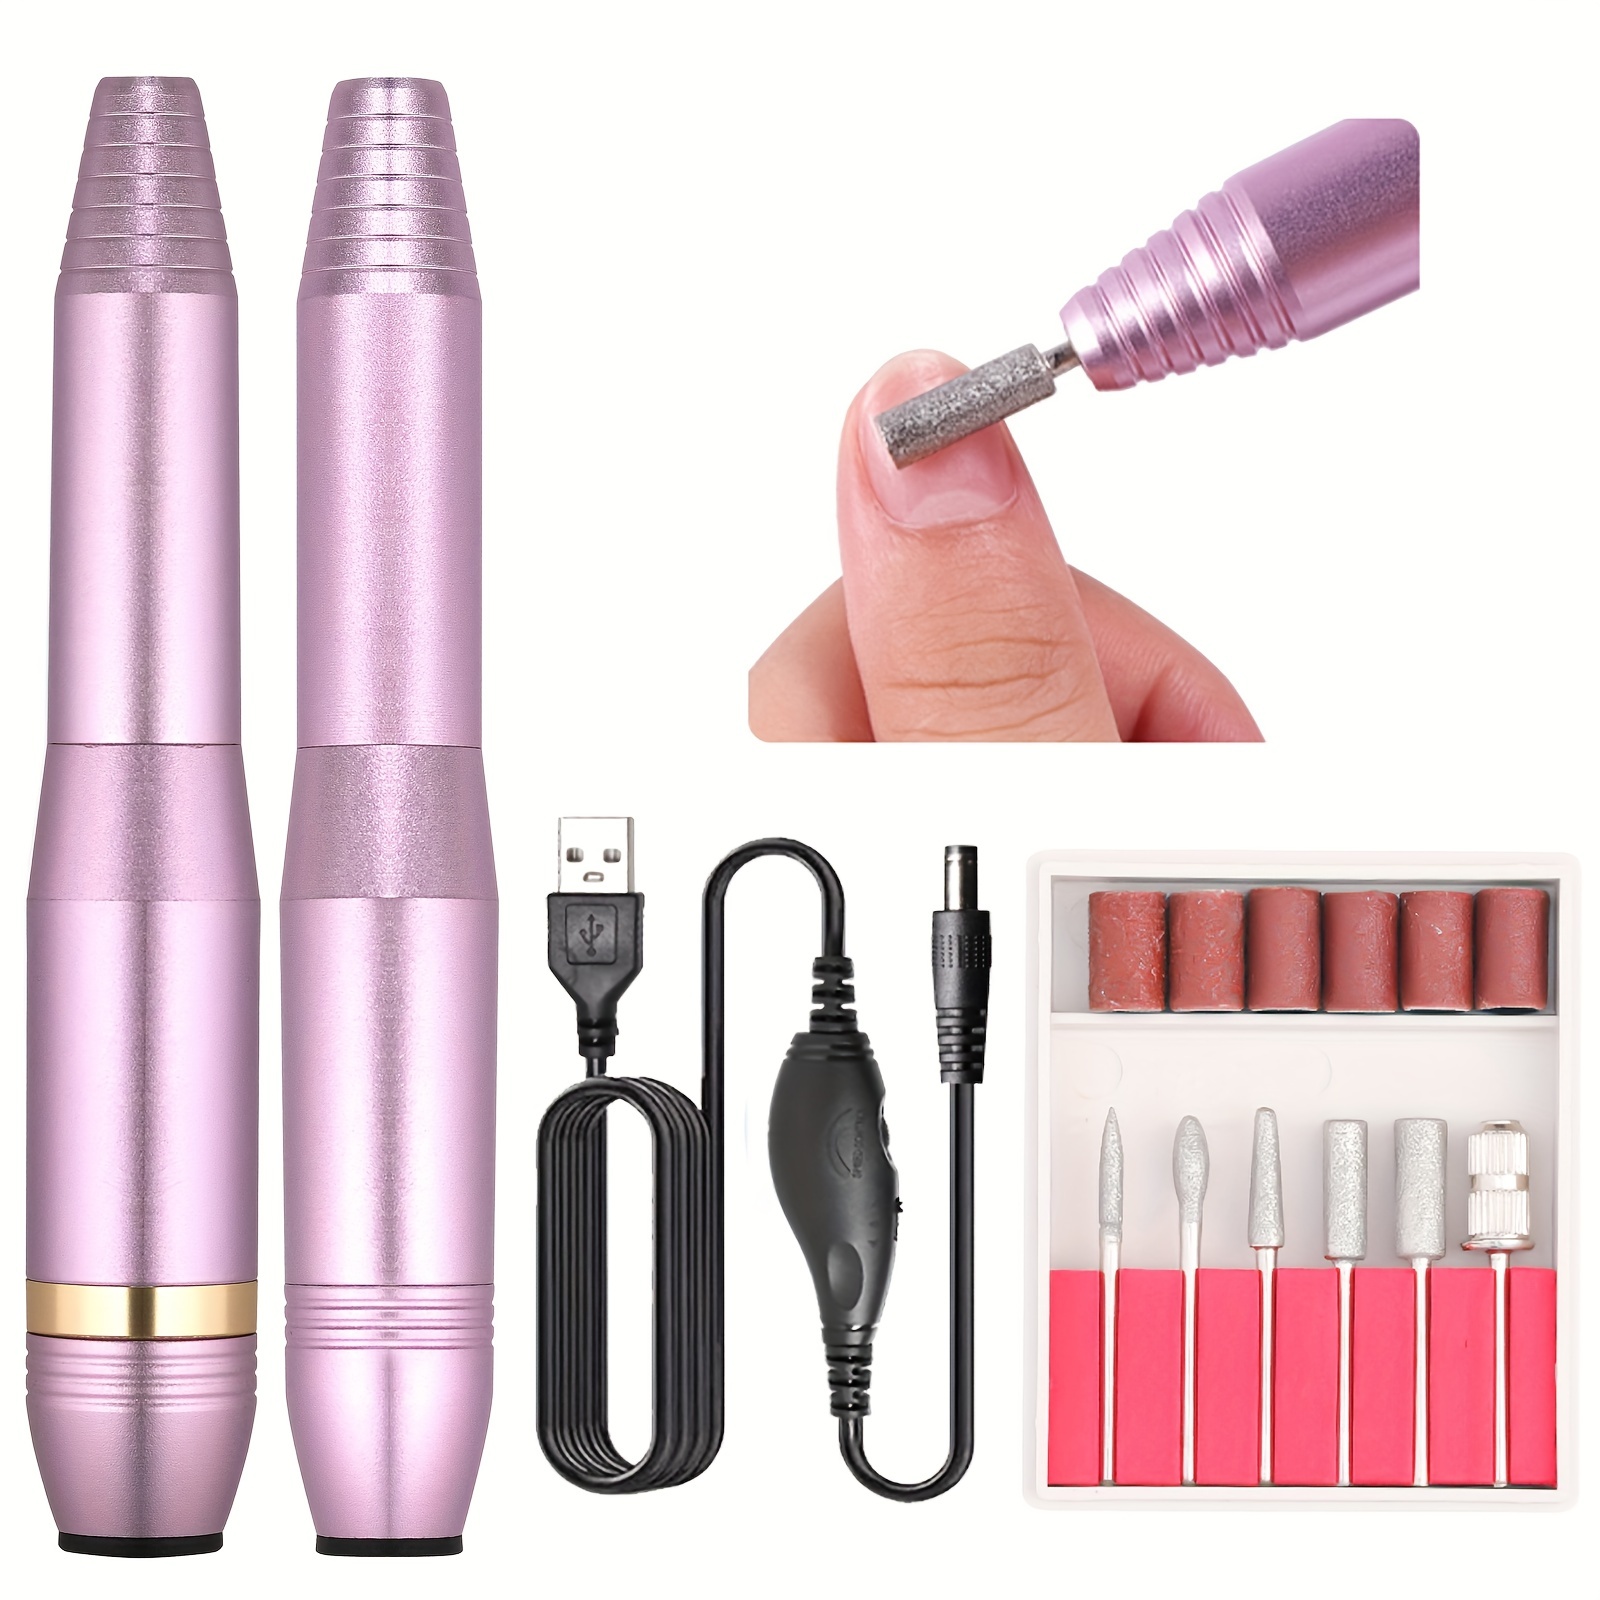 

Electric Nail Drill Machine Kit For Acrylic Gel Nails - Portable Manicure And Pedicure Tool Set For Shaping And Polishing